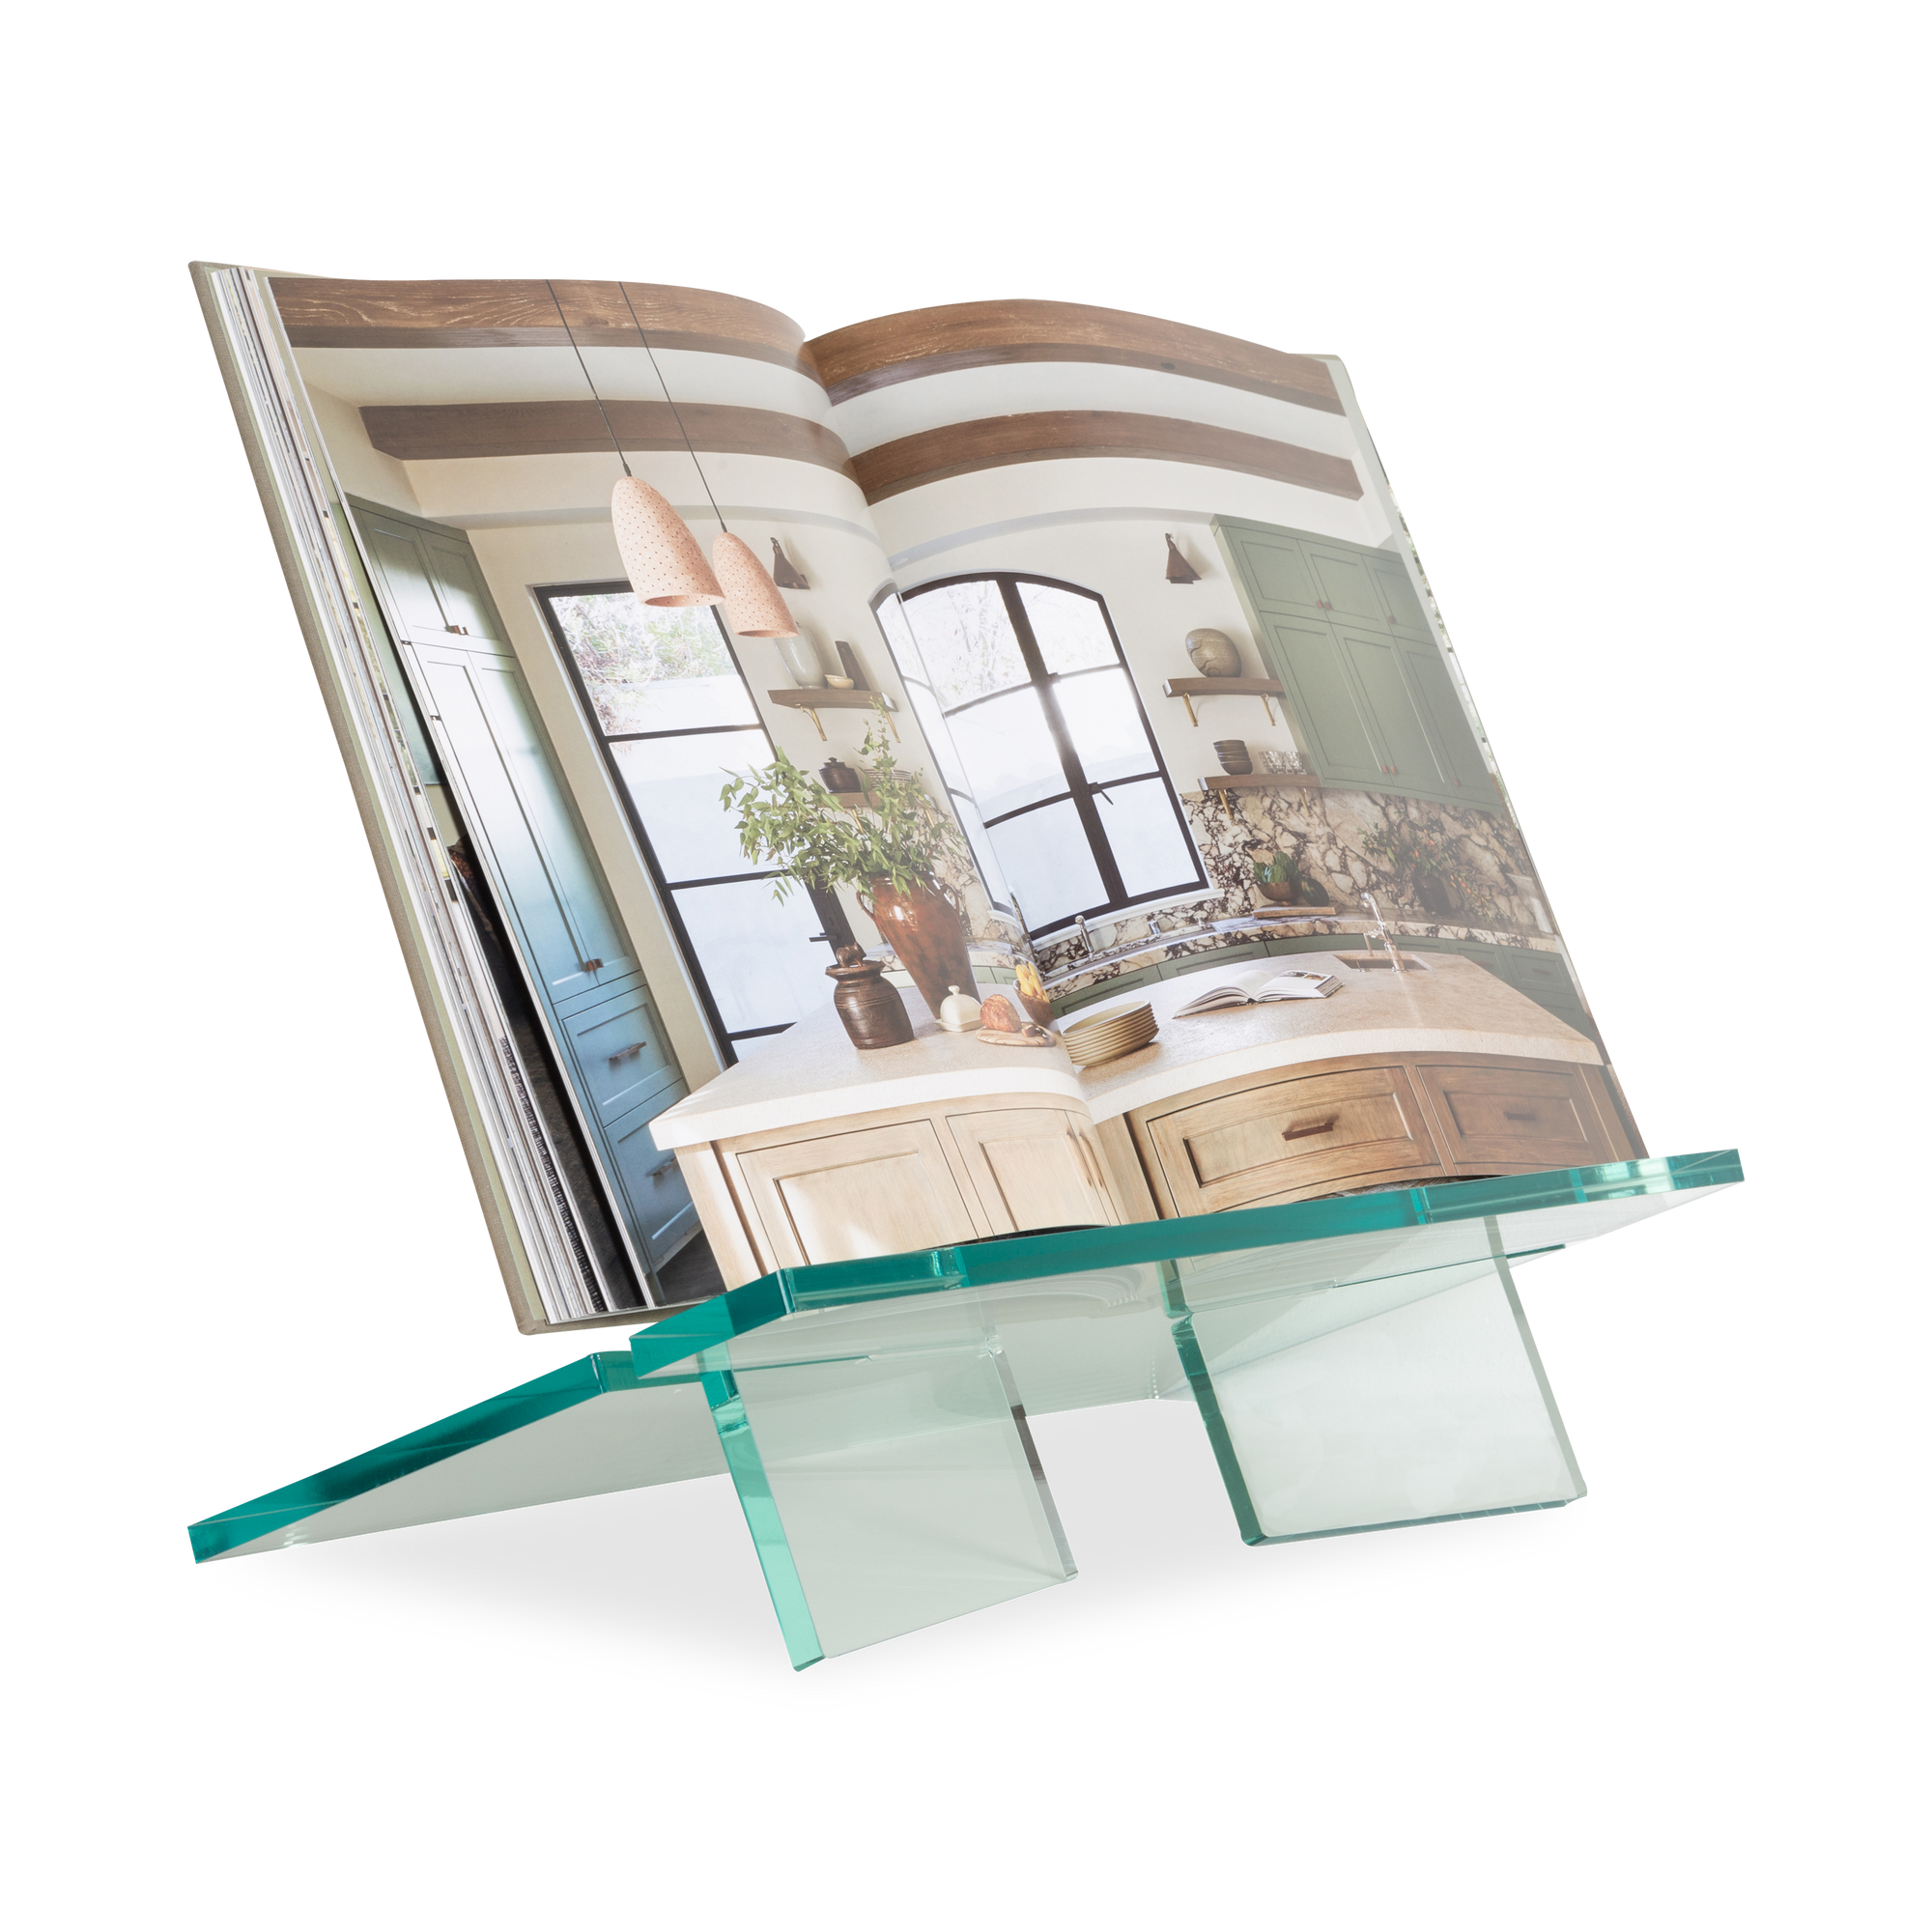 Defined by its elegant yet masterfully functional design, this Acrylic Bookstand will display your book upright, whether closed or open to leaf through, allowing you to proudly sho